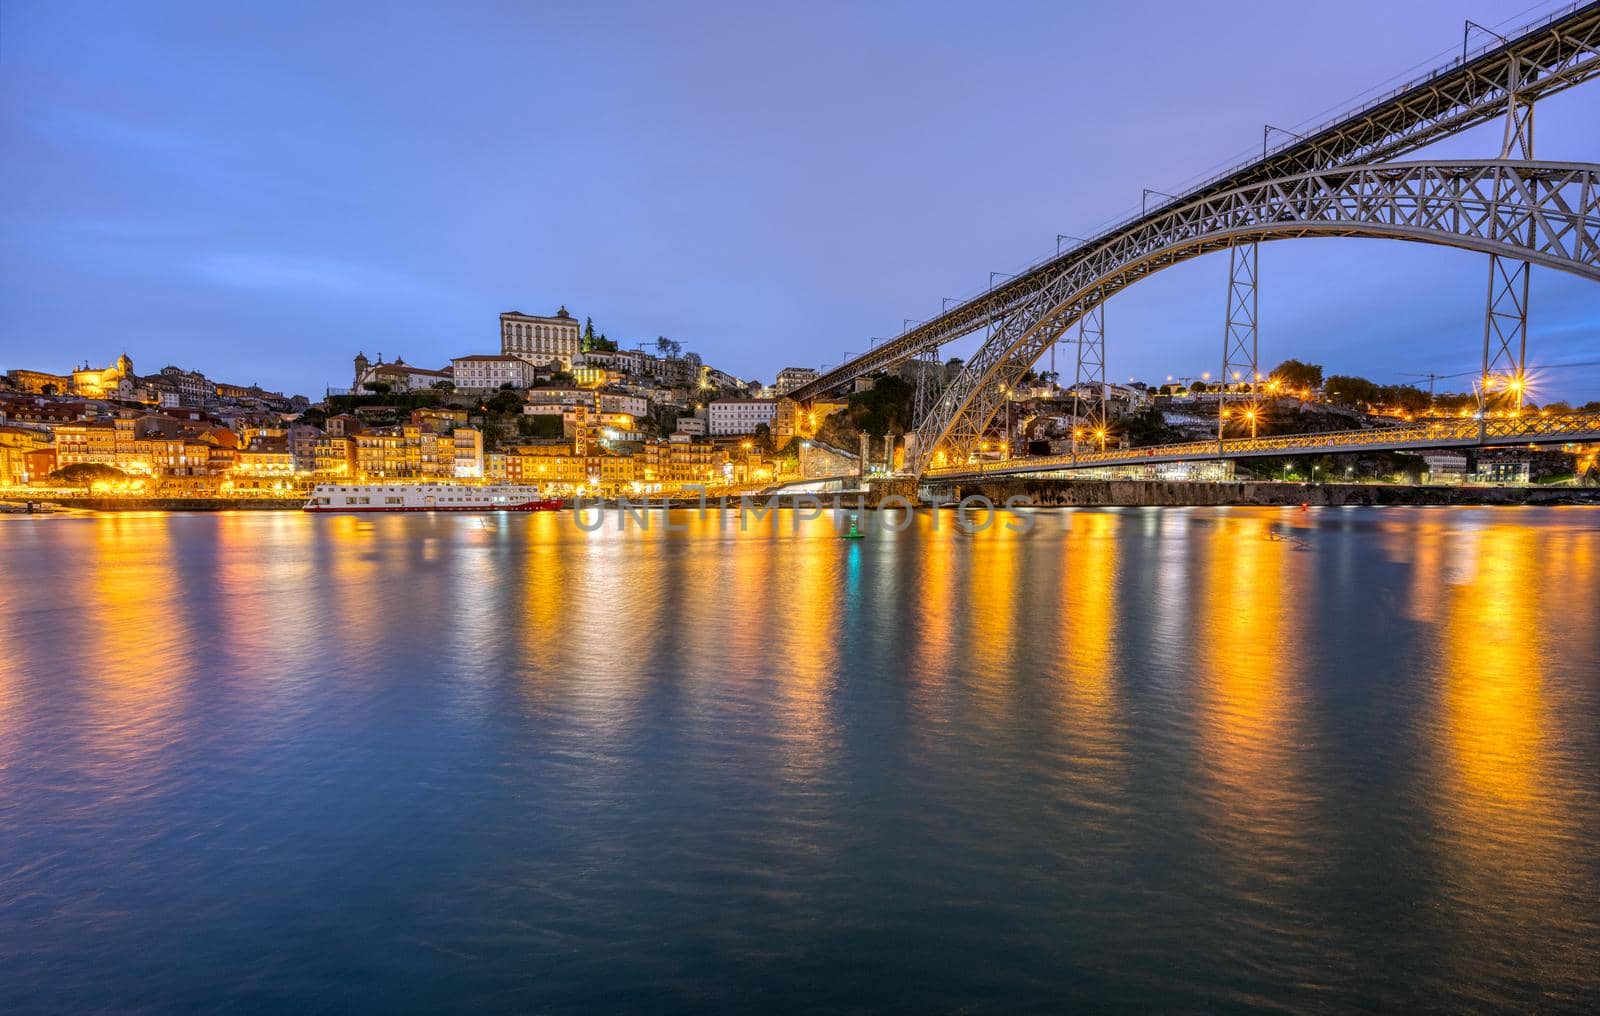 The old town of Porto with the river Douro and the famous iron bridge at dusk